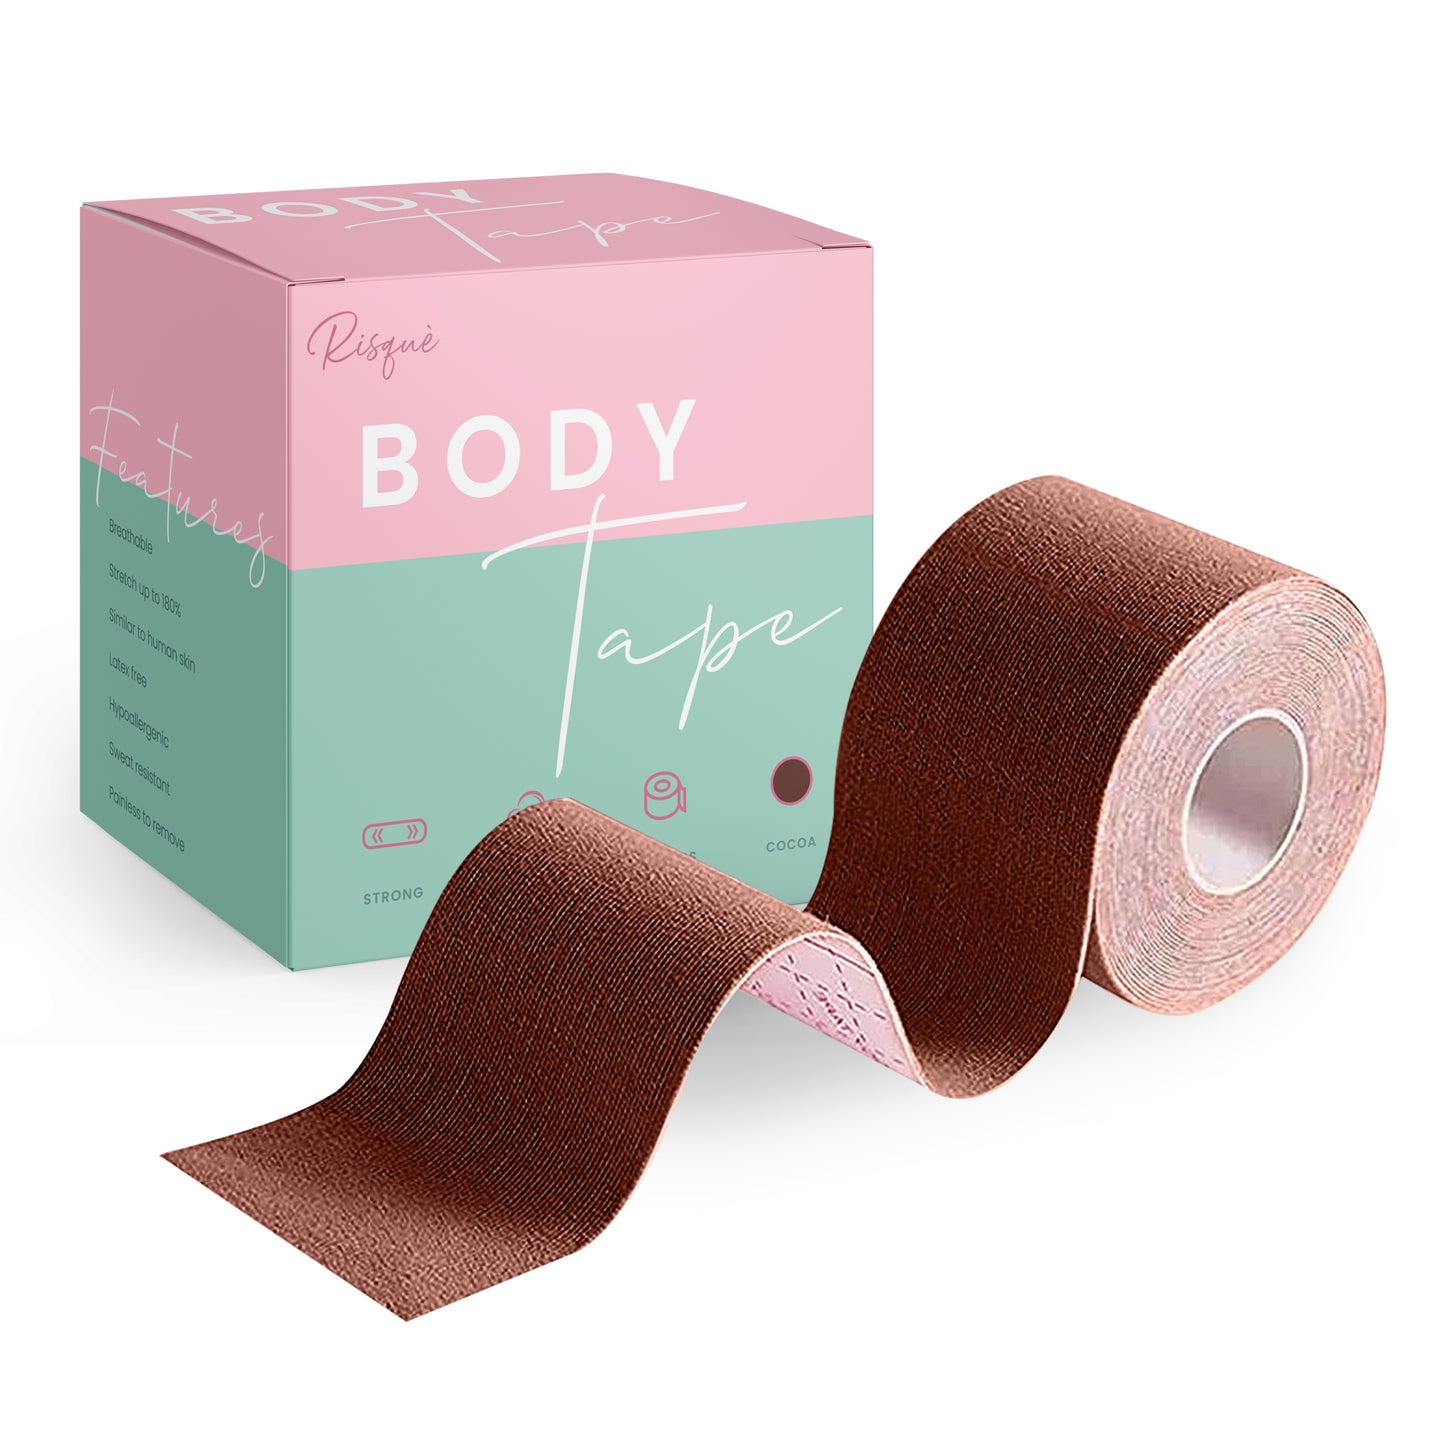 Flash Tape double sided adhesive clothing and body tape. Made in USA